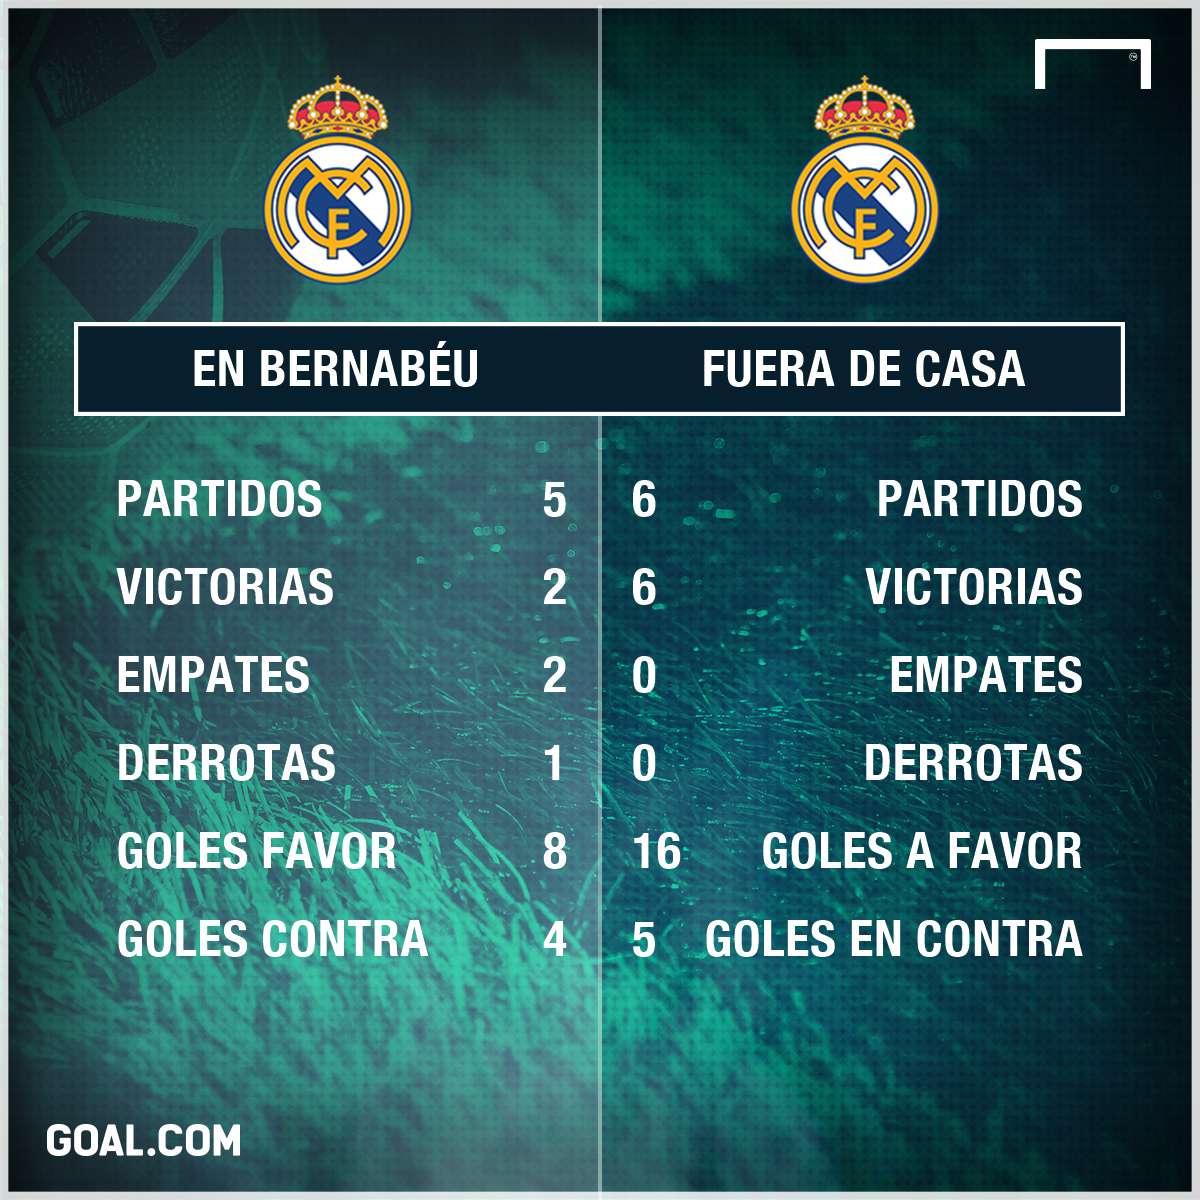 GFX Info Real Madrid stats home and away